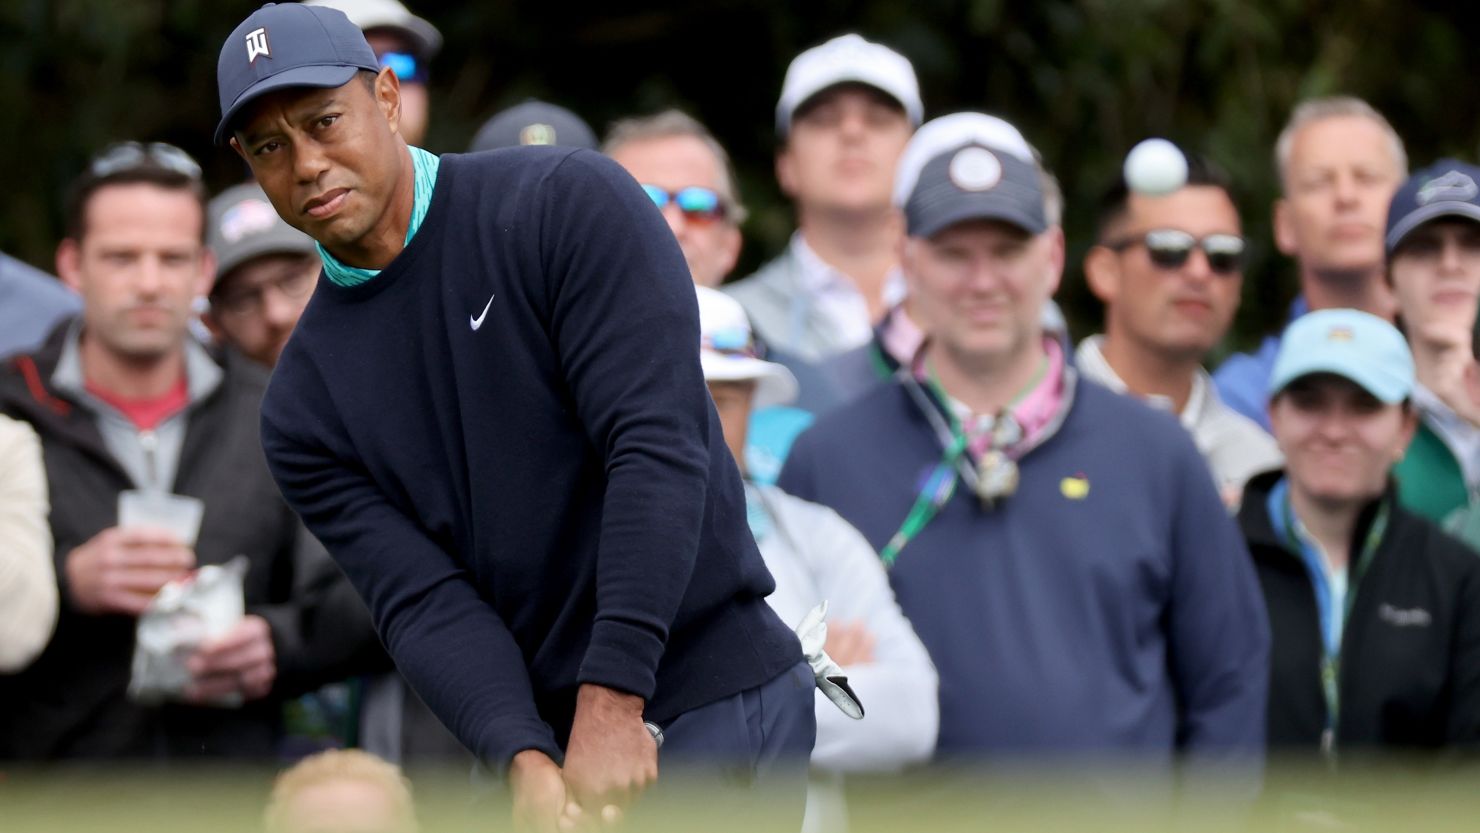 Tiger Woods plays his shot on the first hole during the second round of The Masters at Augusta National Golf Club.